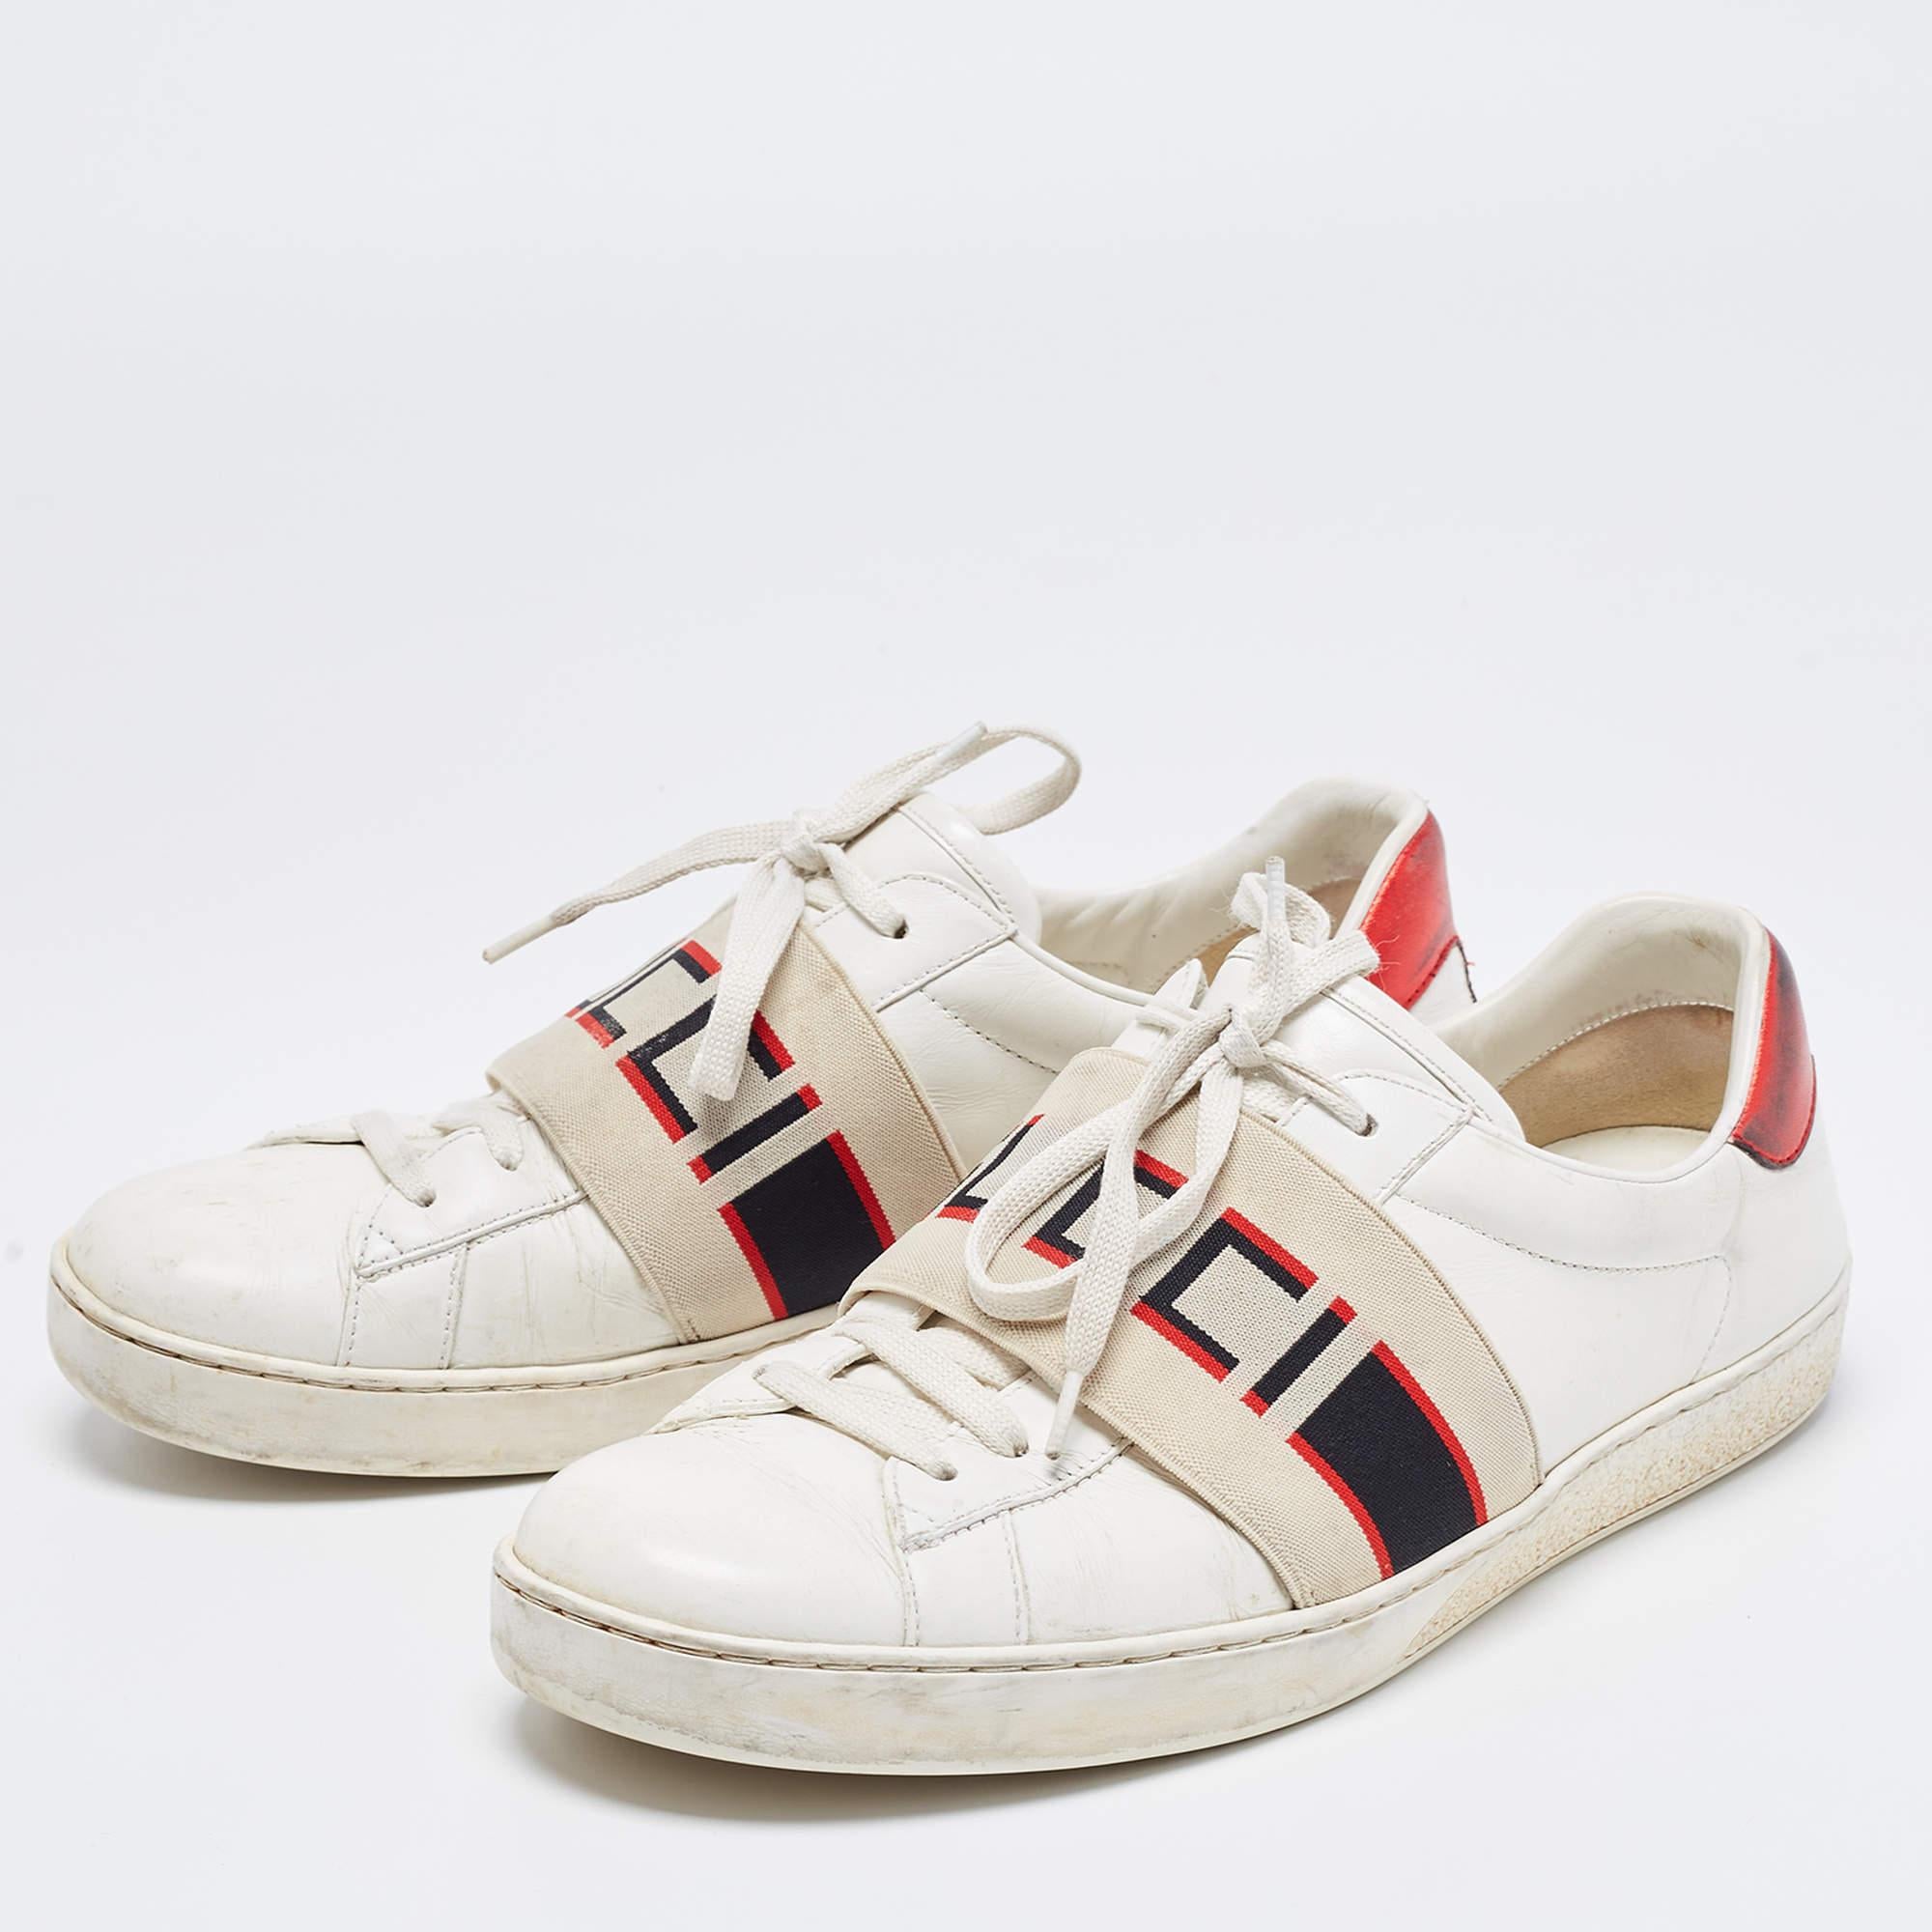 Gucci White Leather Logo Band Ace Sneakers Size 41.5 For Sale 2